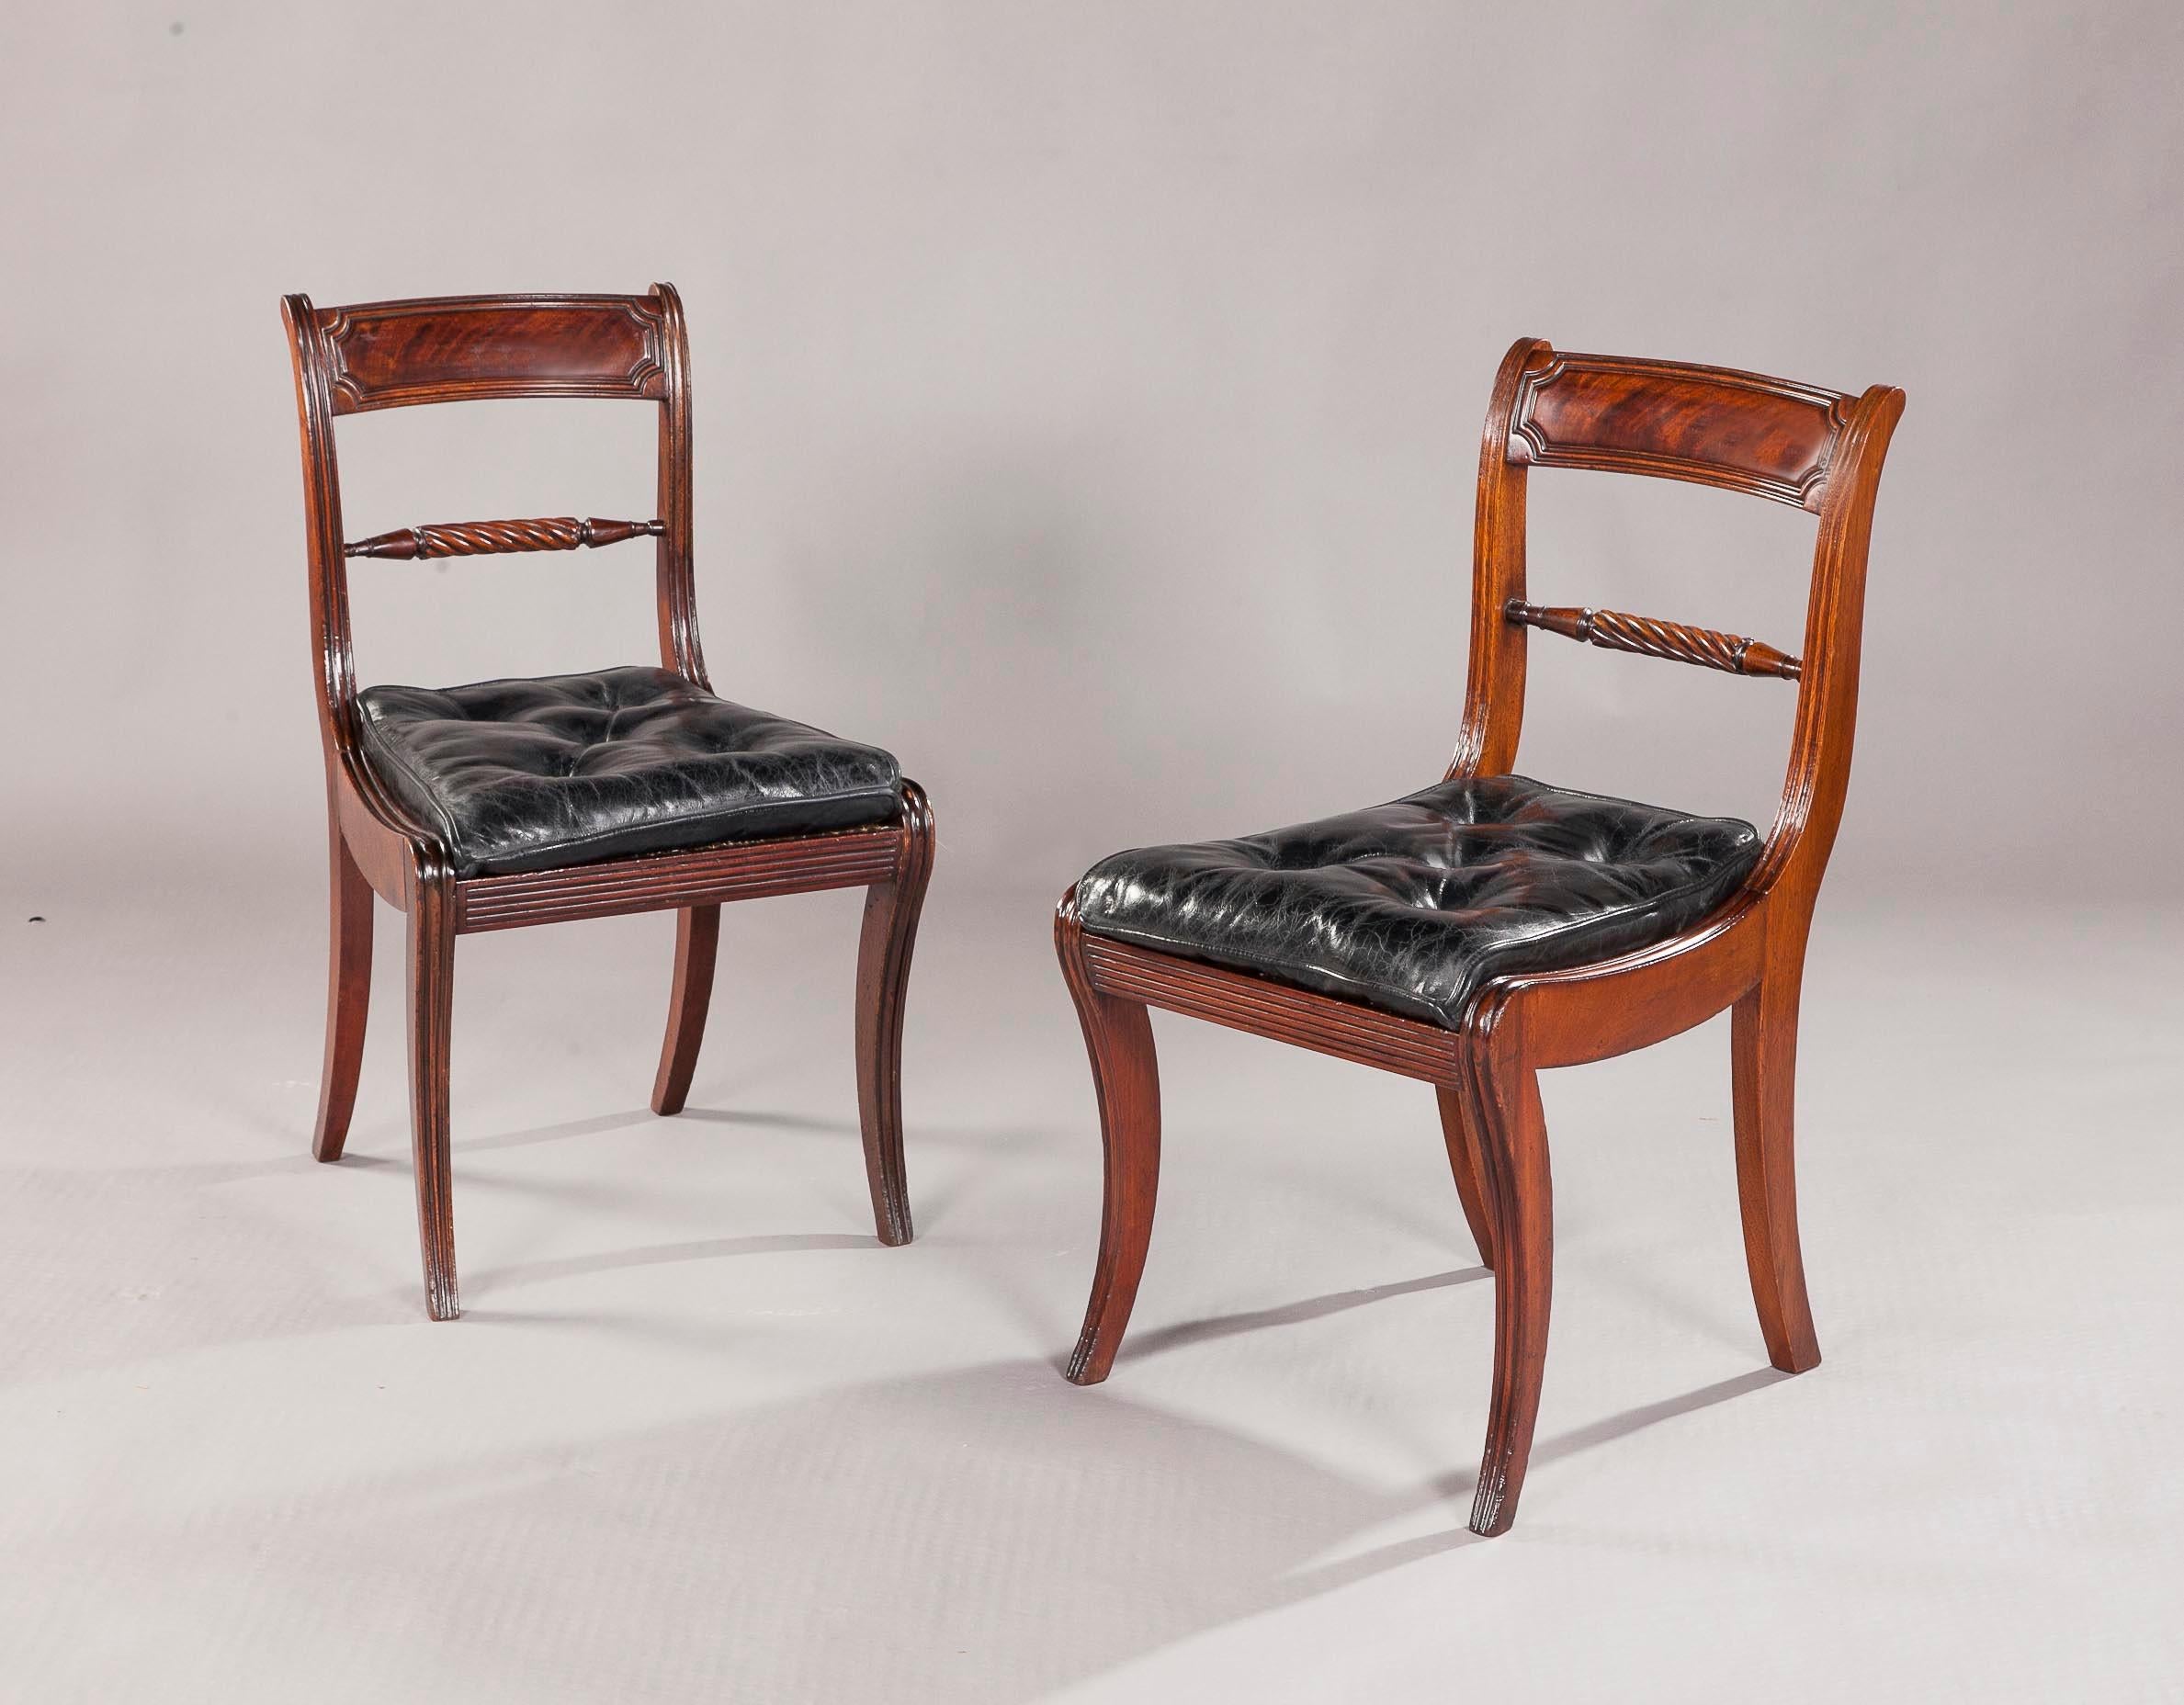 A fine set of eighteen regency mahogany sabre leg dining chairs, the reeded panel backs above a central reeded splat, with bergre seats, covered in black hide, on reeded sabre legs, good original colour and patina throughout.